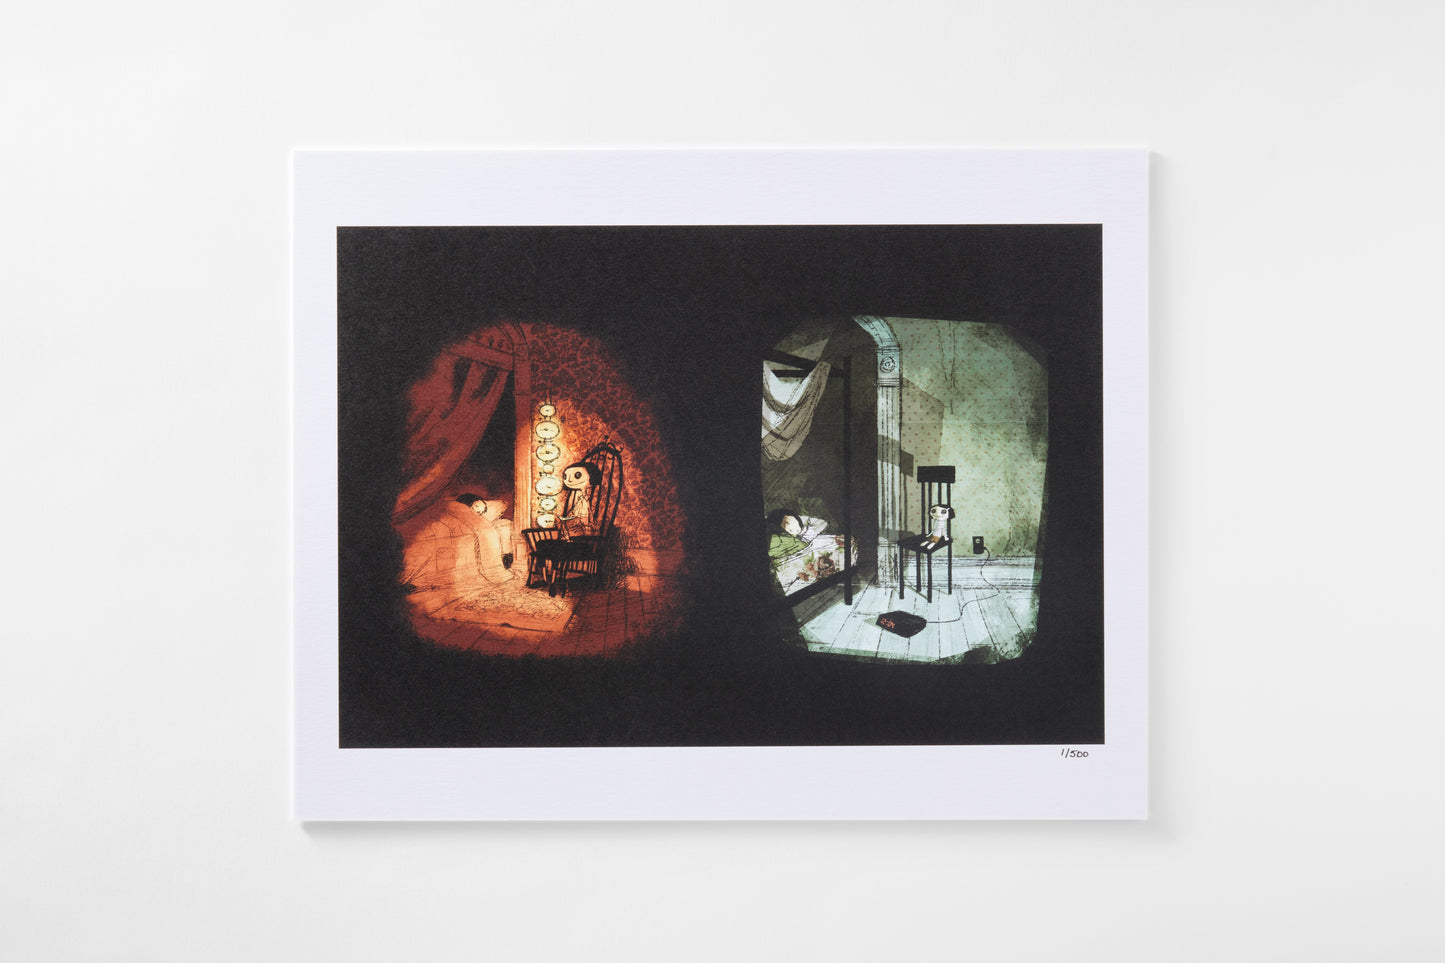 Coraline's Bedroom Limited Edition Concept Art Print